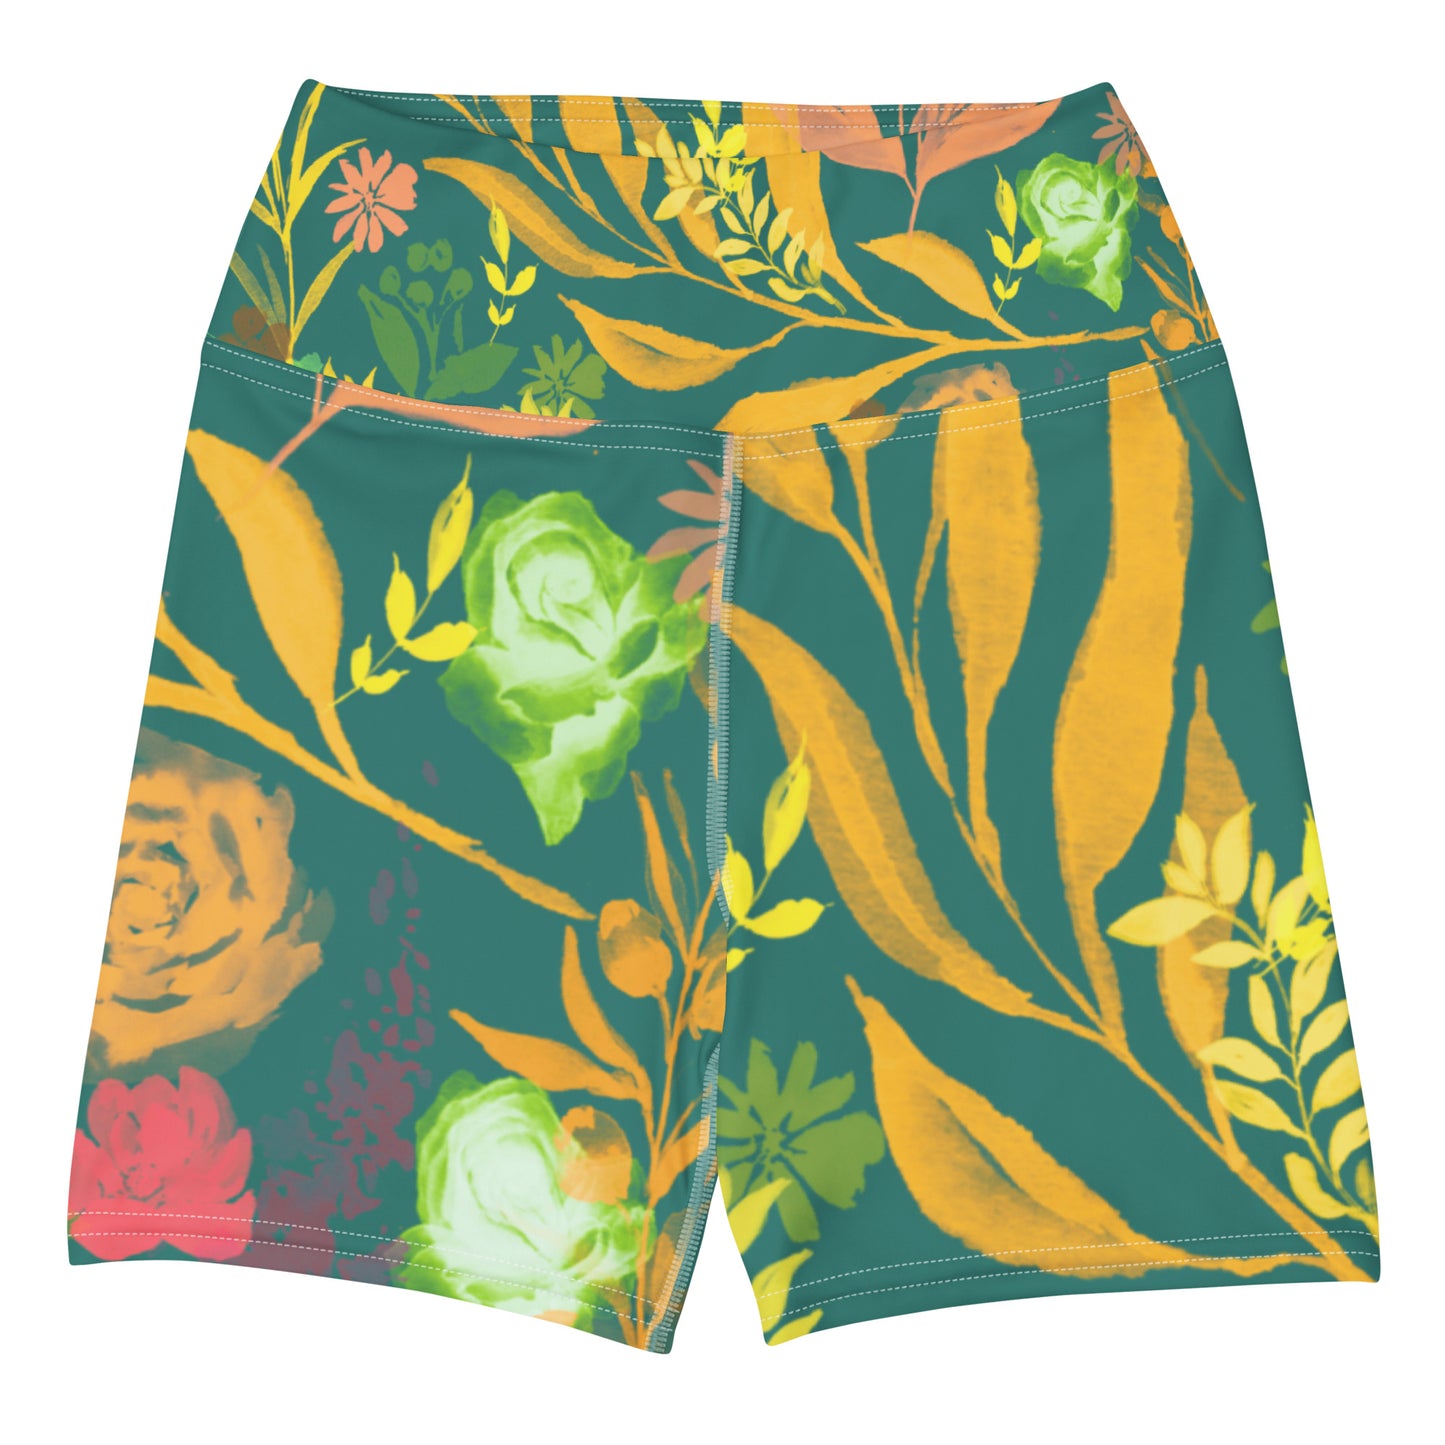 Multicolor Flowers Green Yoga Shorts. Design hand-painted by the Designer Maria Alejandra Echenique